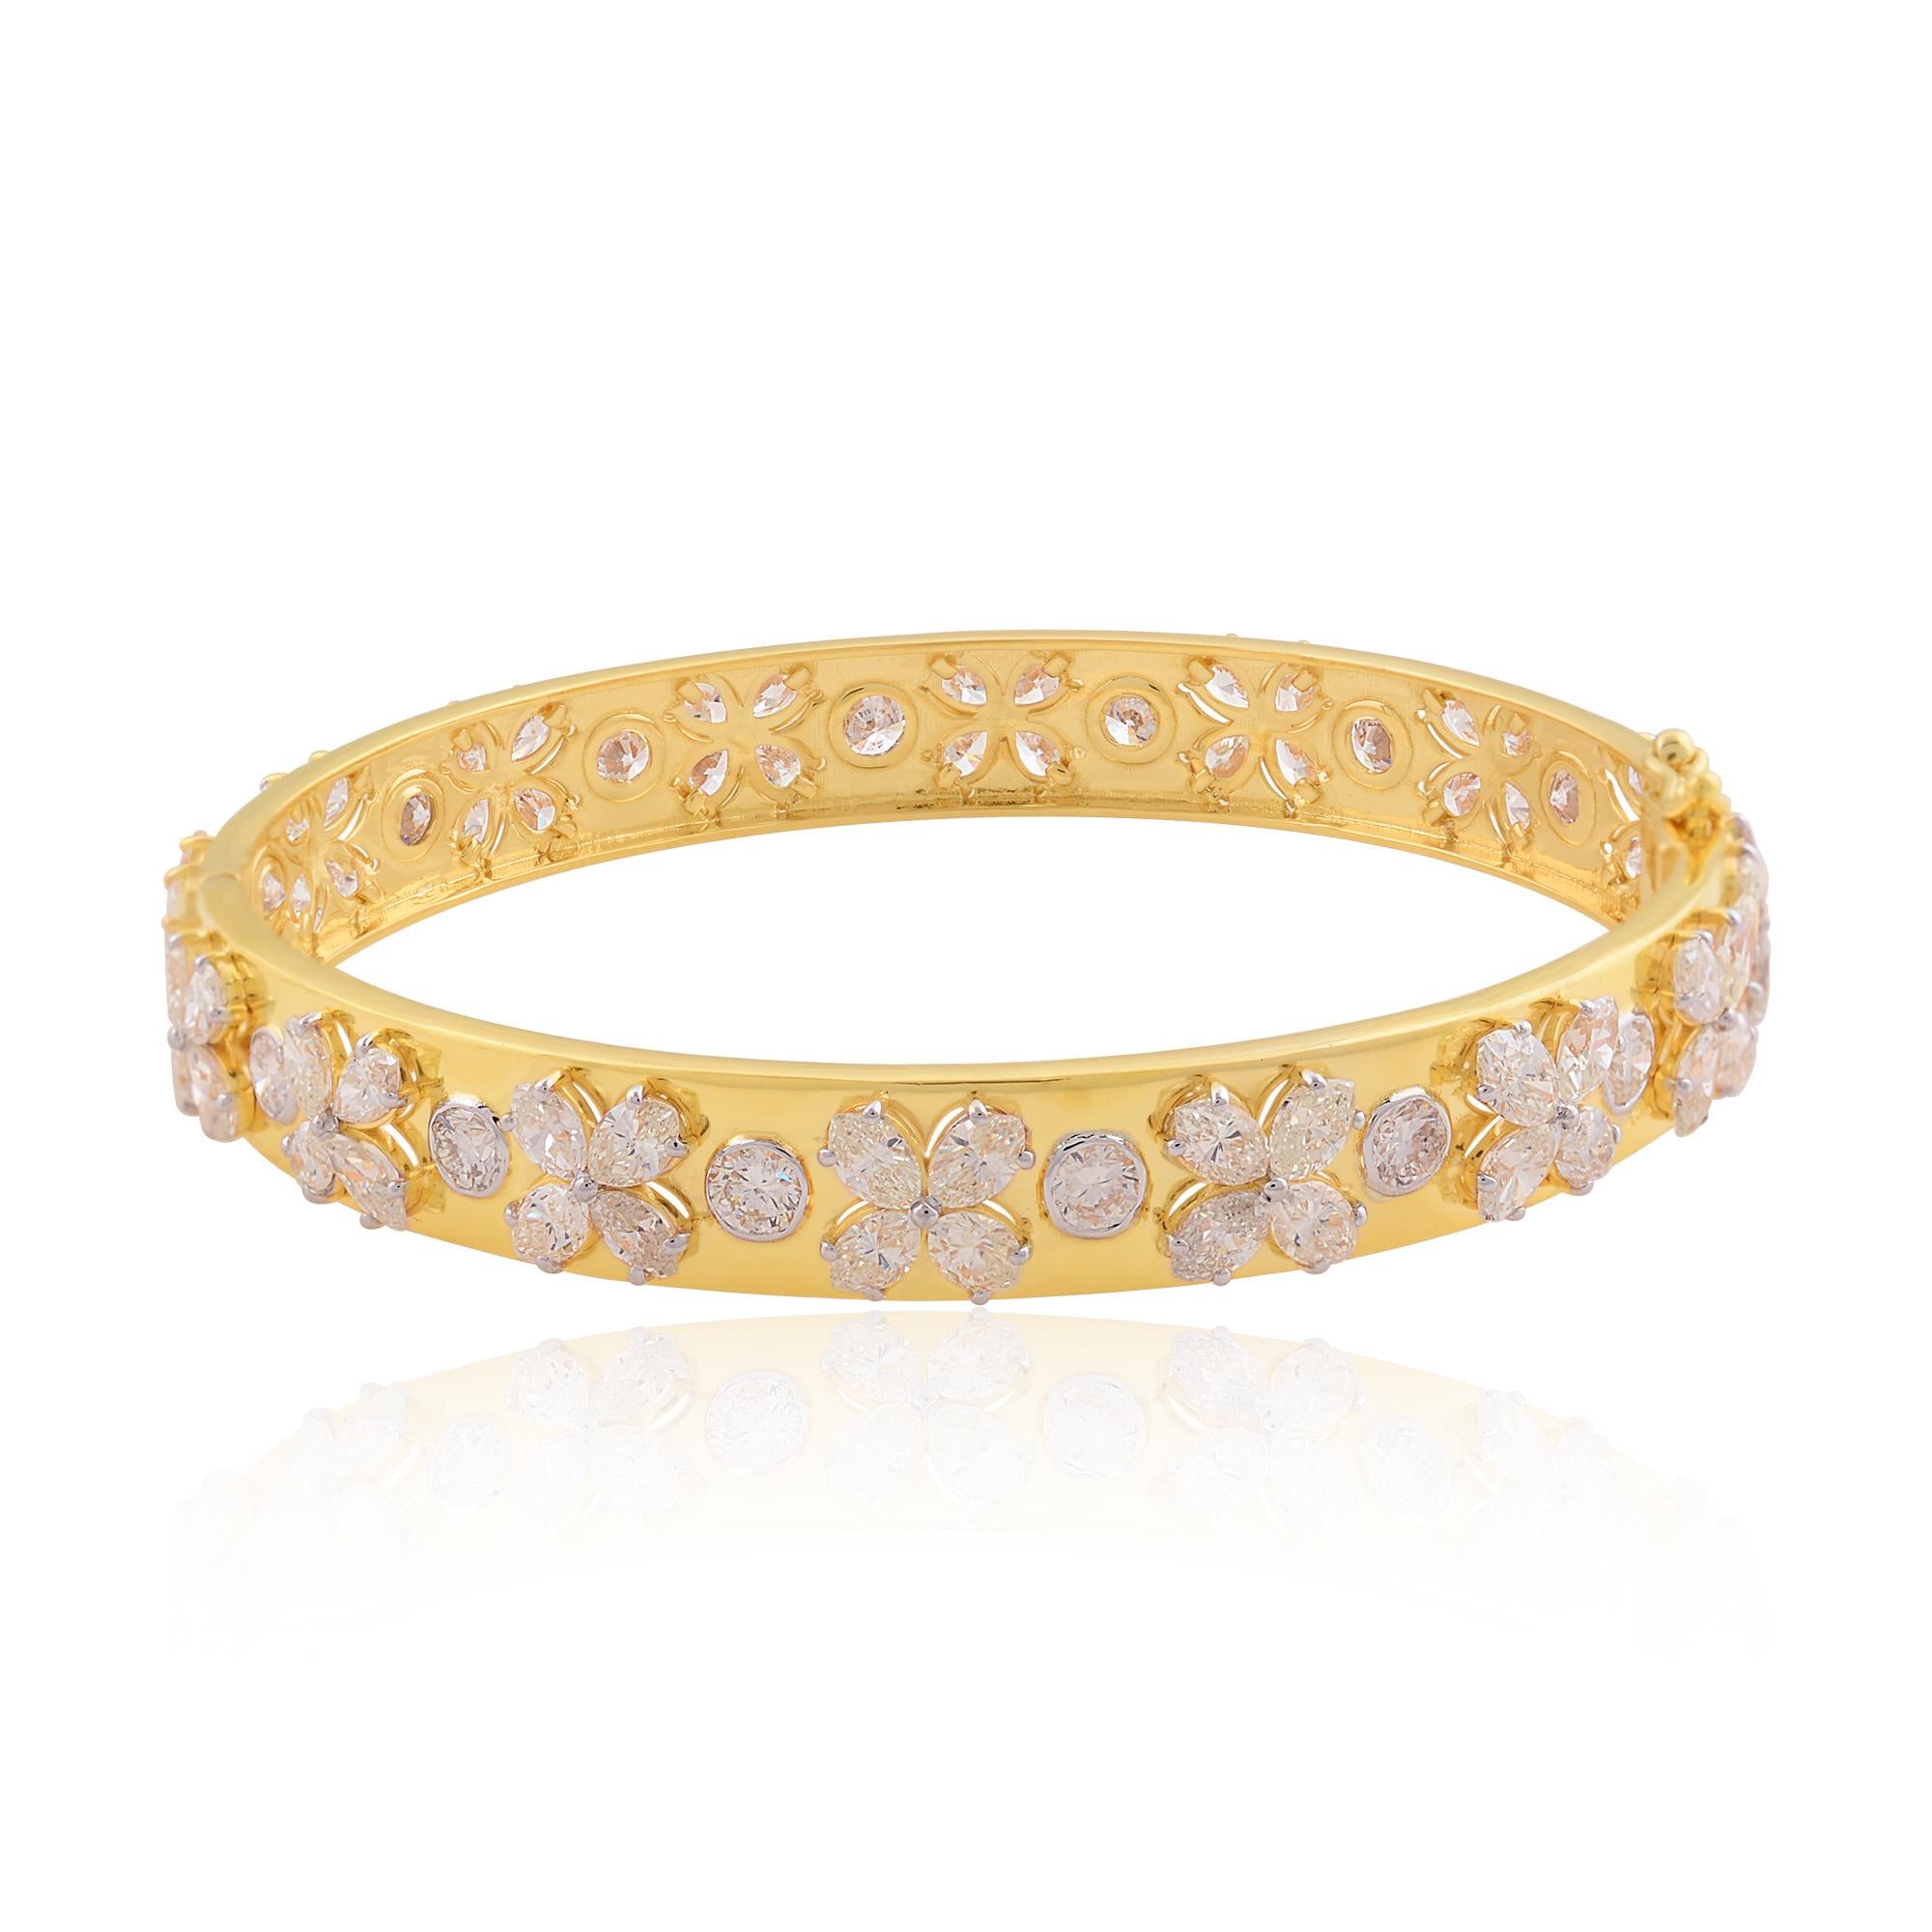 This stunning Diamond Clover Bangle is a luxurious and timeless accessory that will add a touch of elegance to any outfit. The bracelet features sparkling marquise & round diamonds set in 18k solid gold.

This is a perfect Gift for Mom, Fiancée,